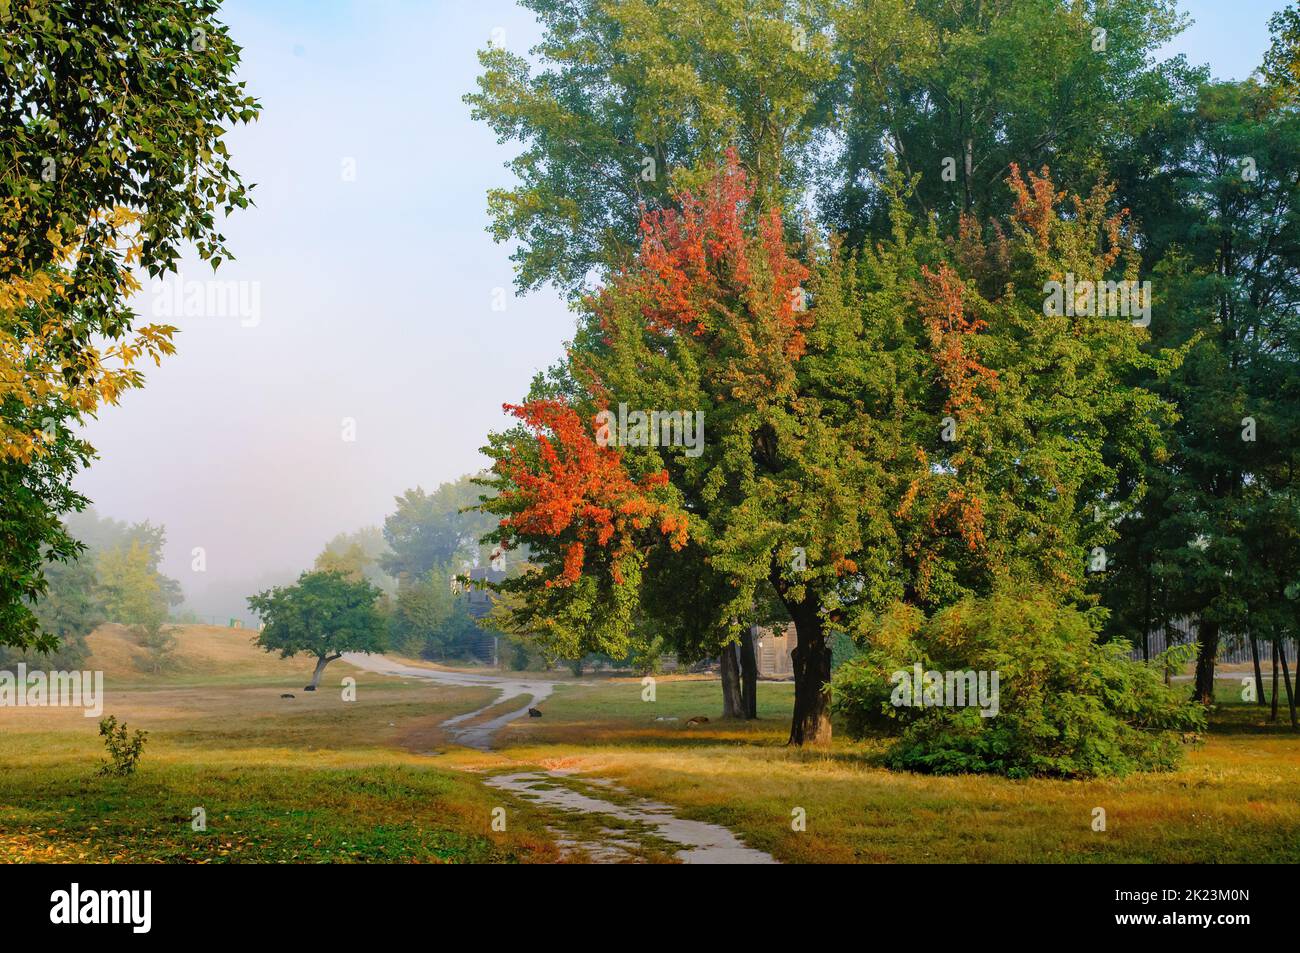 Autumn trees with colored leaves in the park in autumn Stock Photo